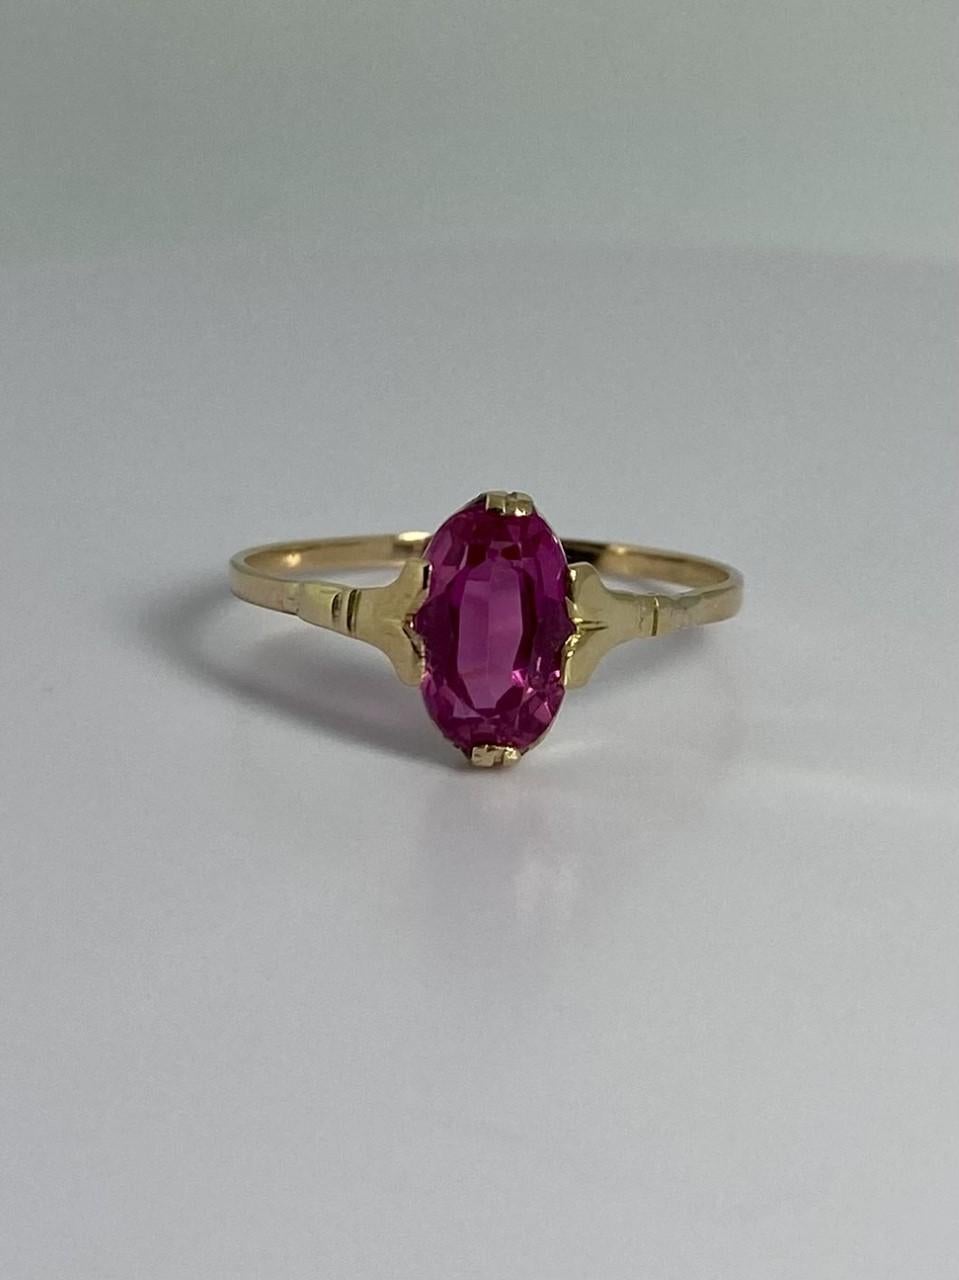 Look at the color of this pink sapphire! This is something else, elegant & refined. This pre-loved ring is made of 14 carat yellow gold and holds a stunning pink sapphire. This jewel is set with an oval faceted sapphire of about 1.76 carat and is